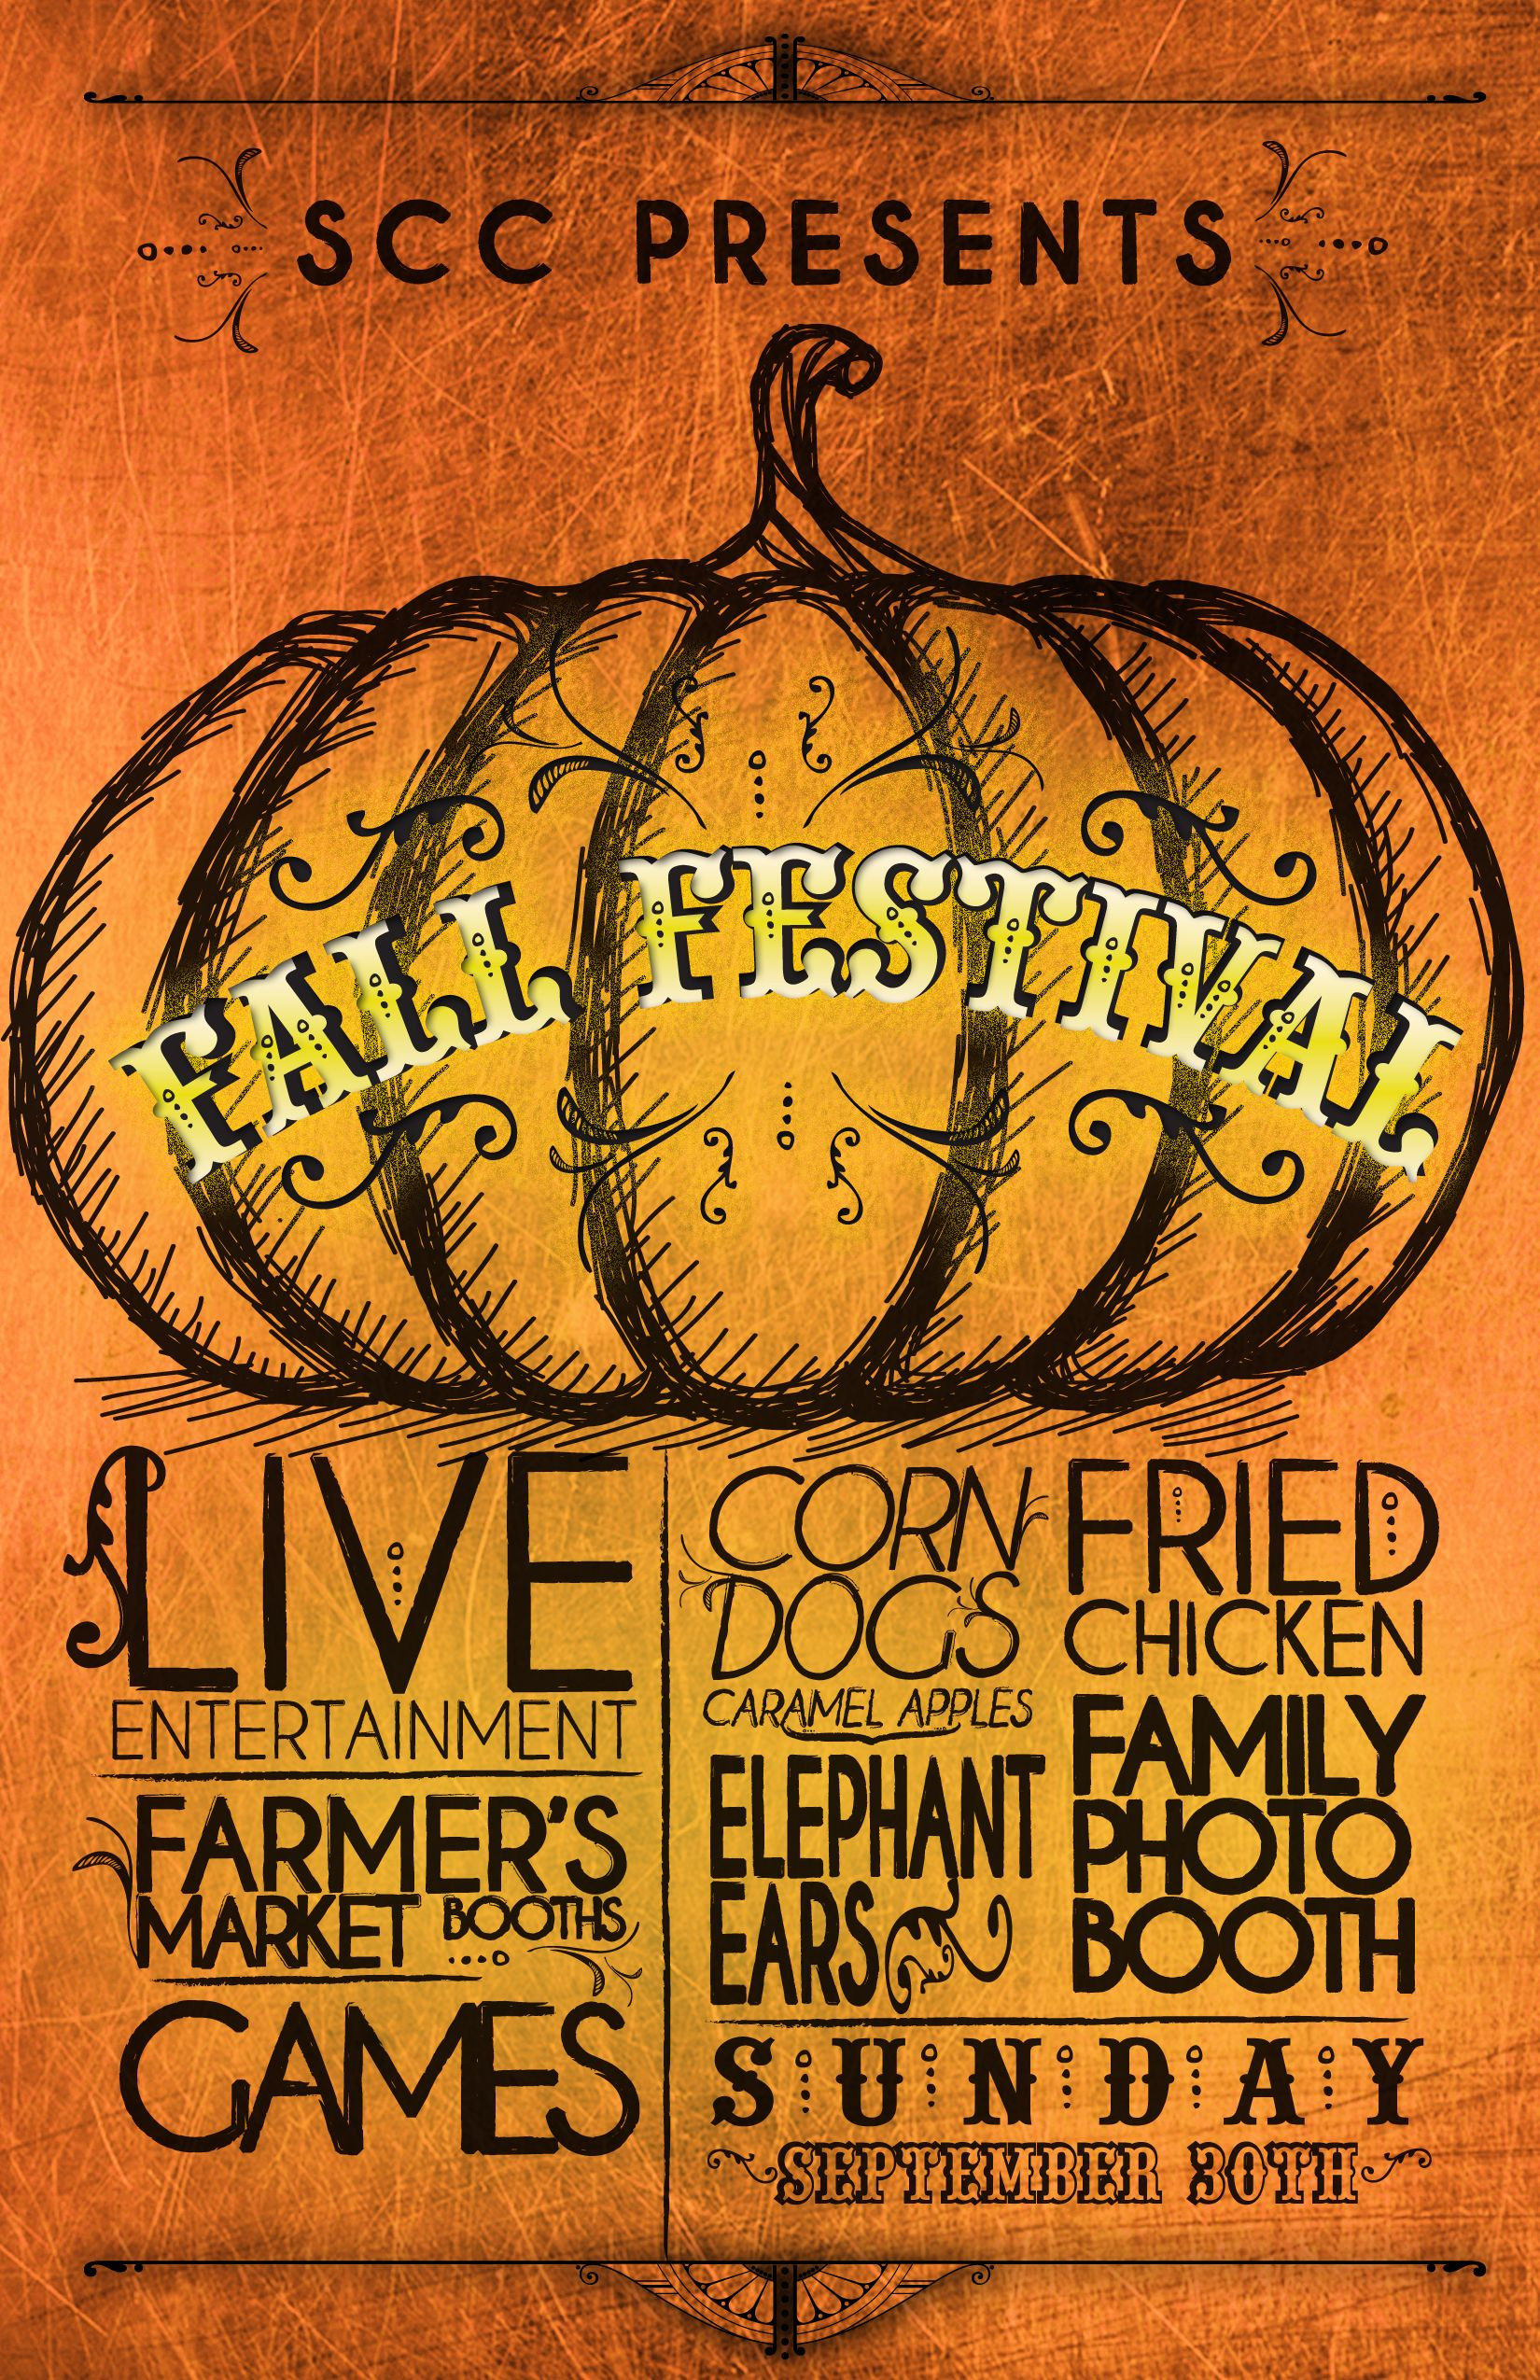 Fall Festival Posters Ideas
 Fall Festival Poster use this typography